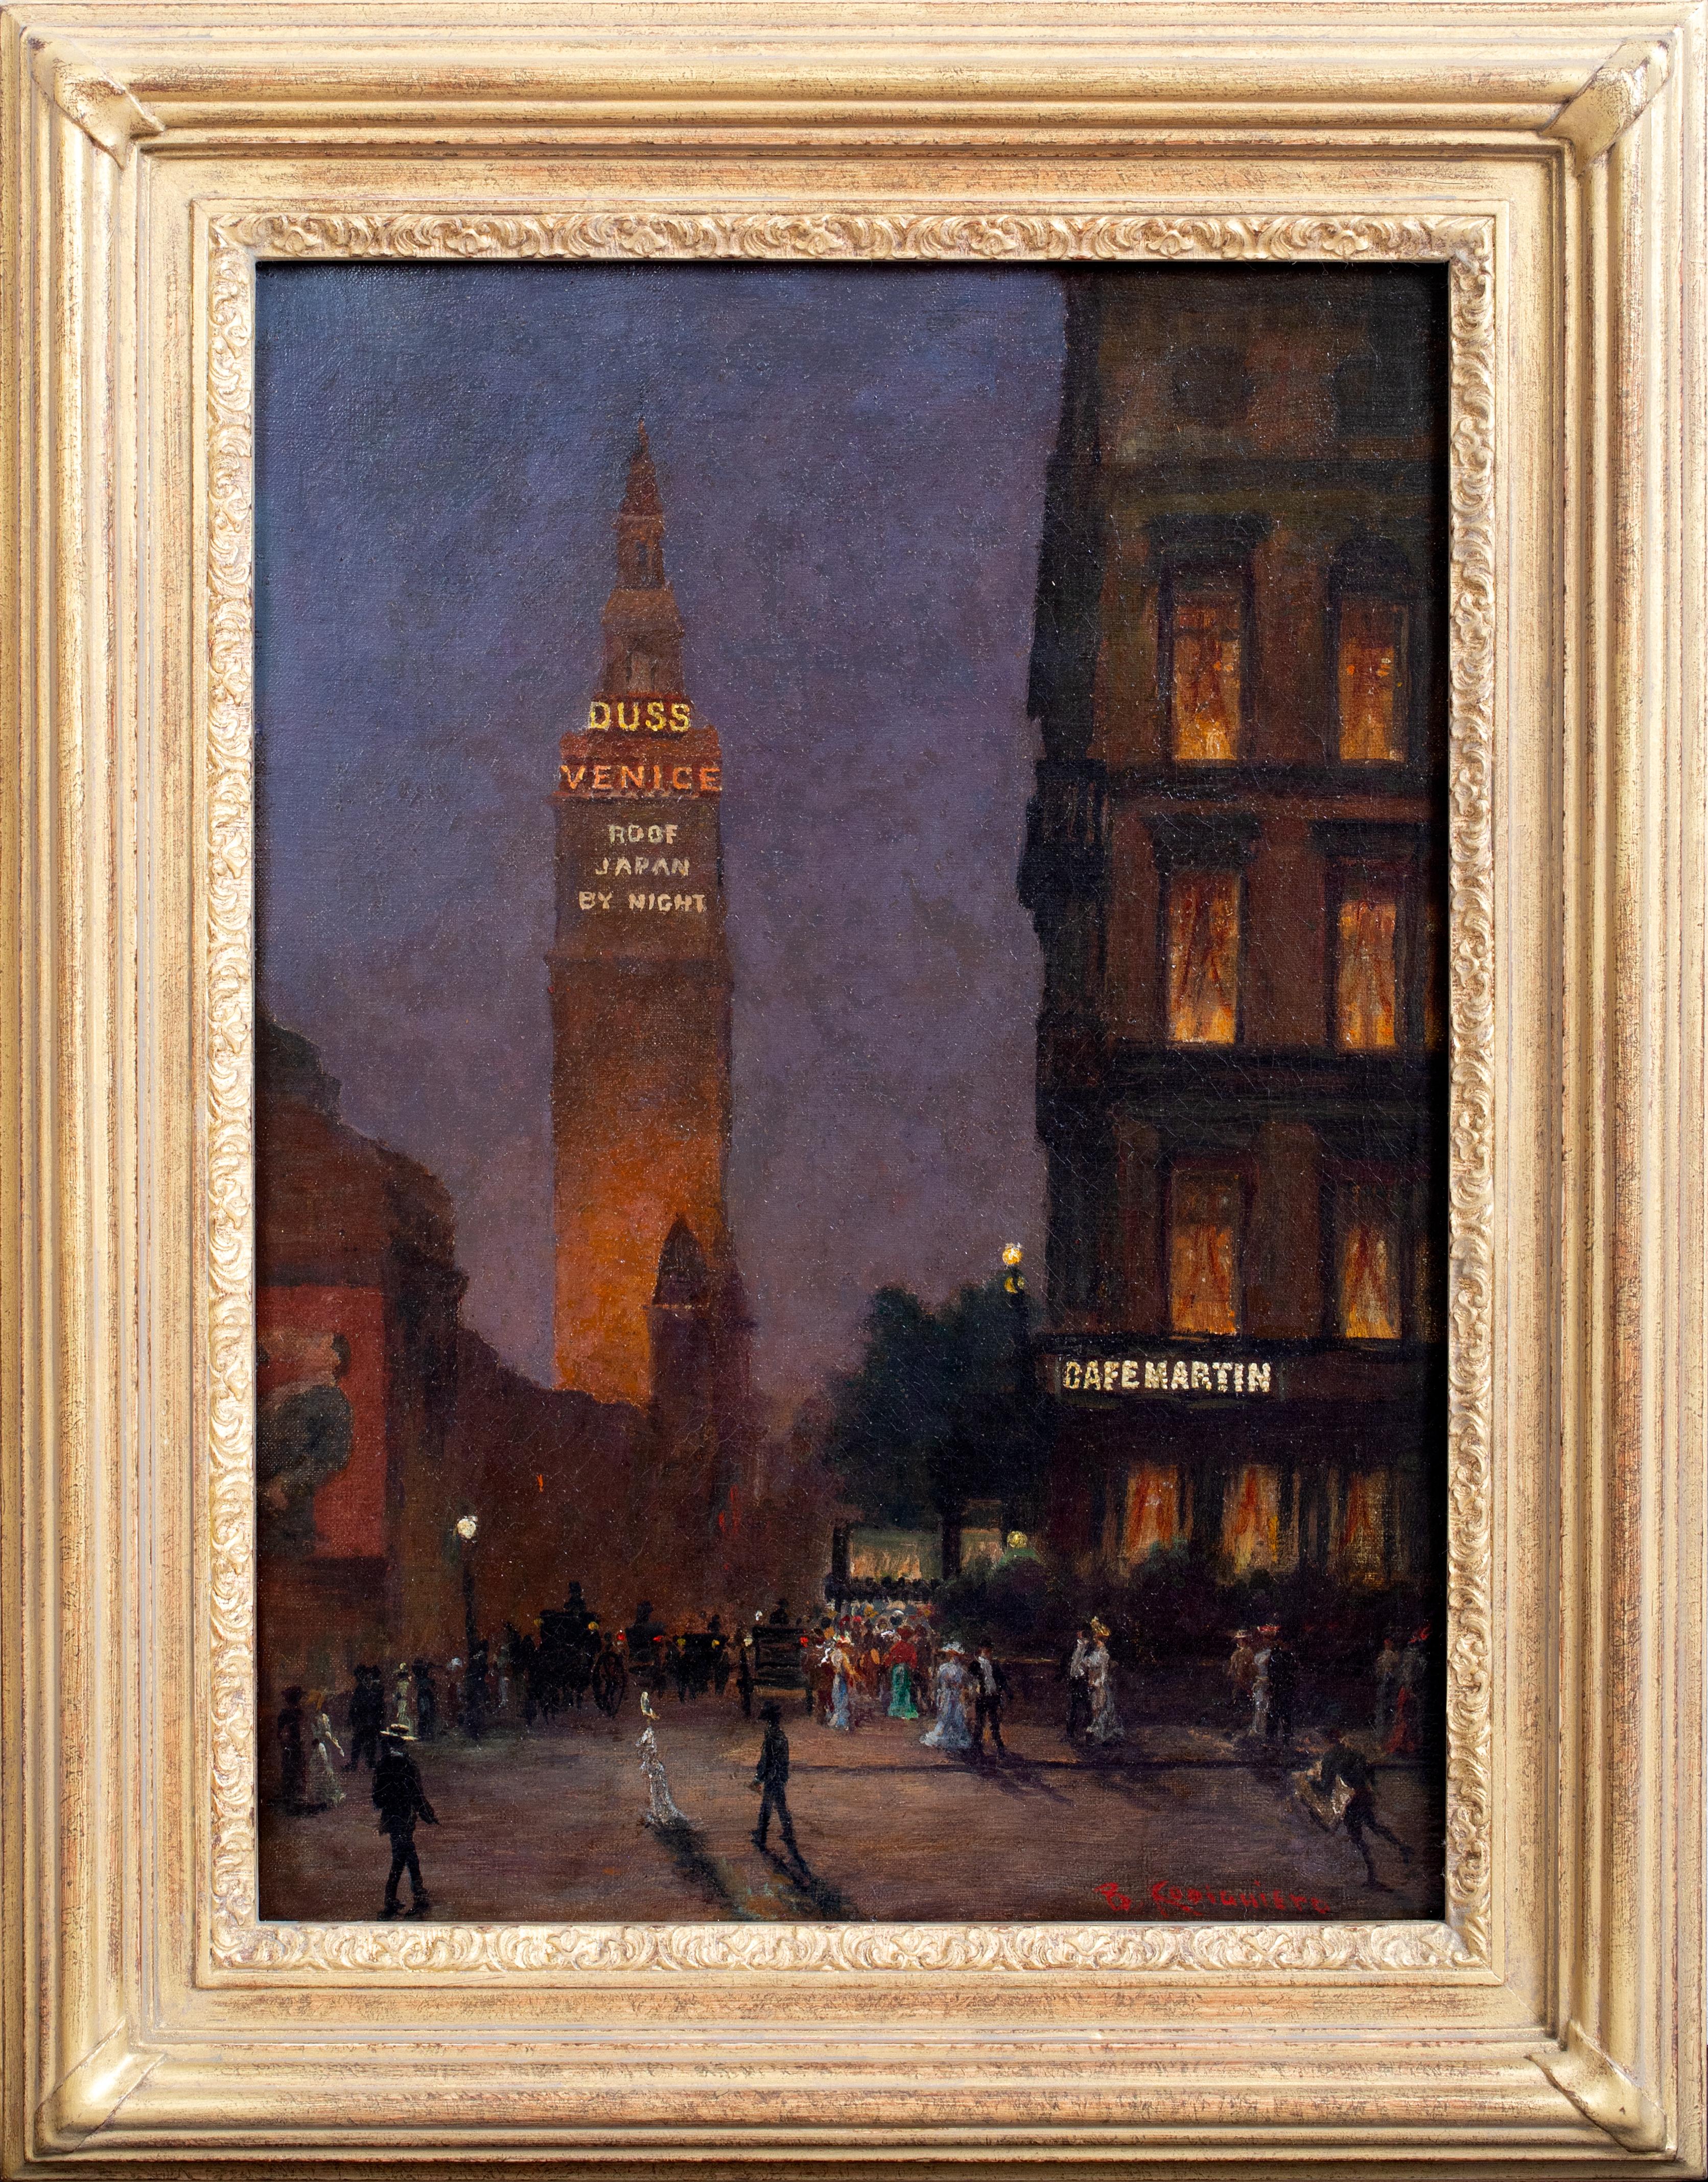 Cafe Martin At Night, Madison Square Park, New York, dated 1902  Rodighiero